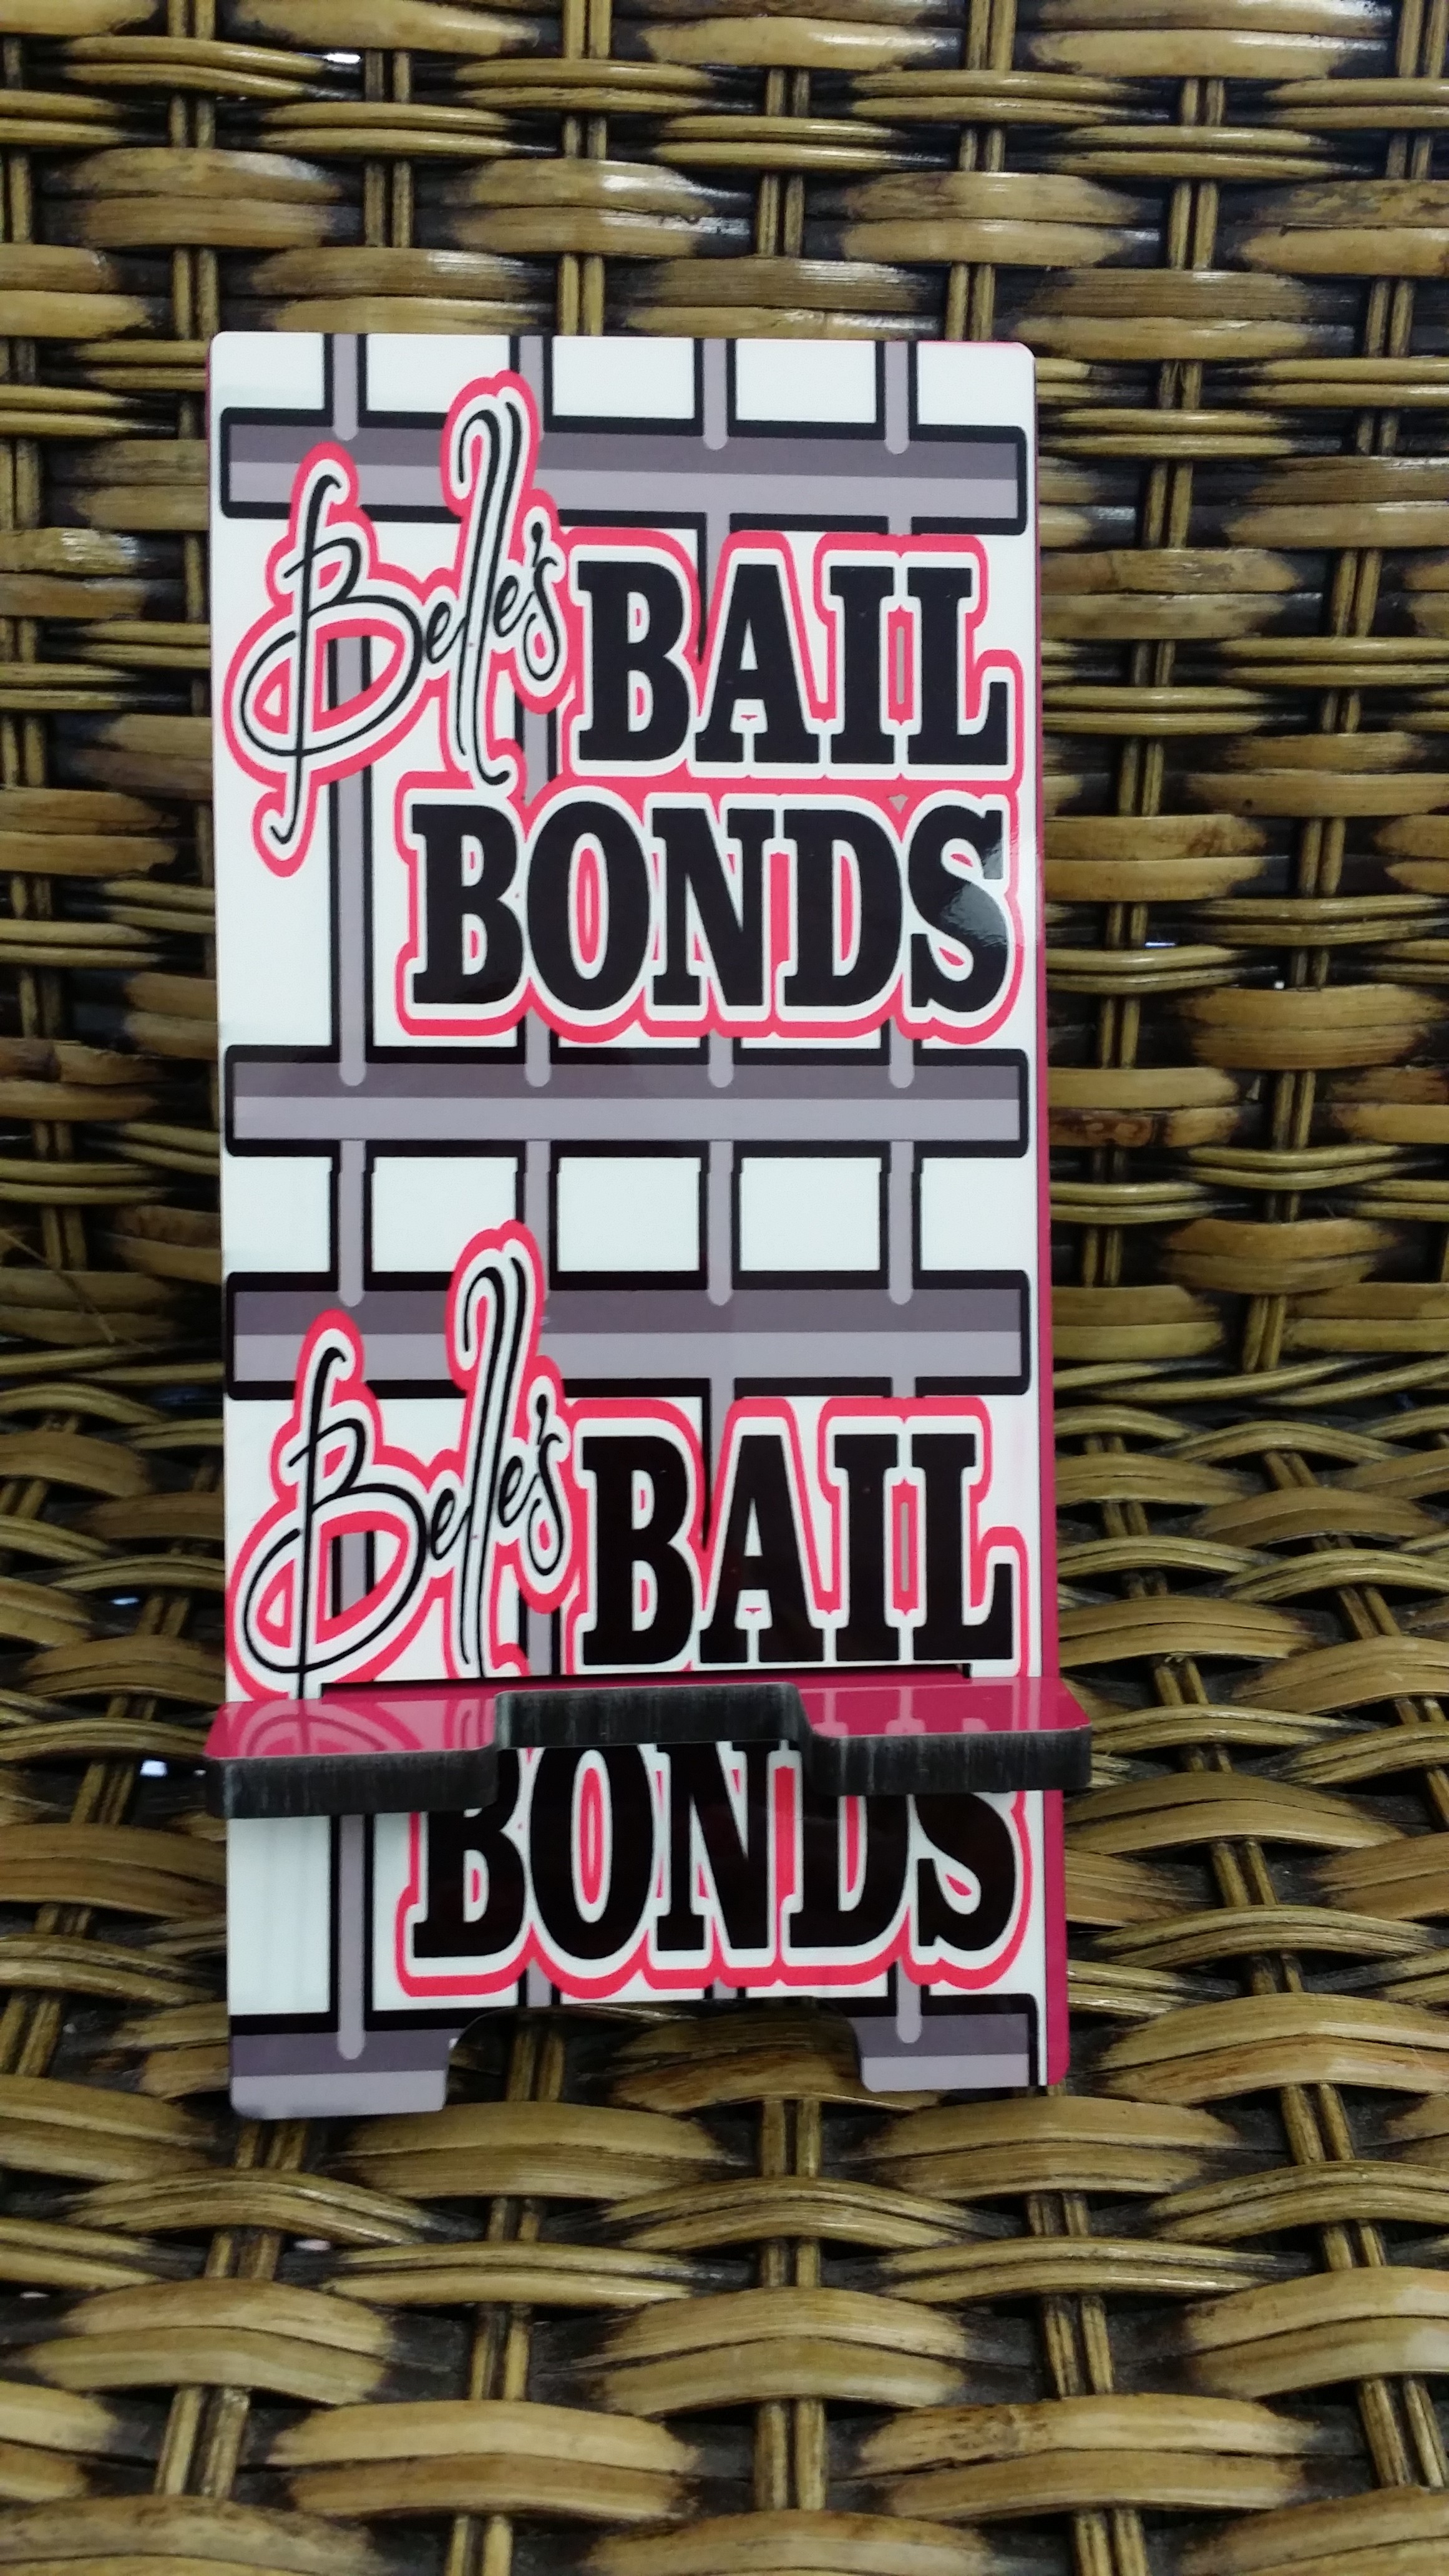 Bail's Bond Phone Stand made with sublimation printing